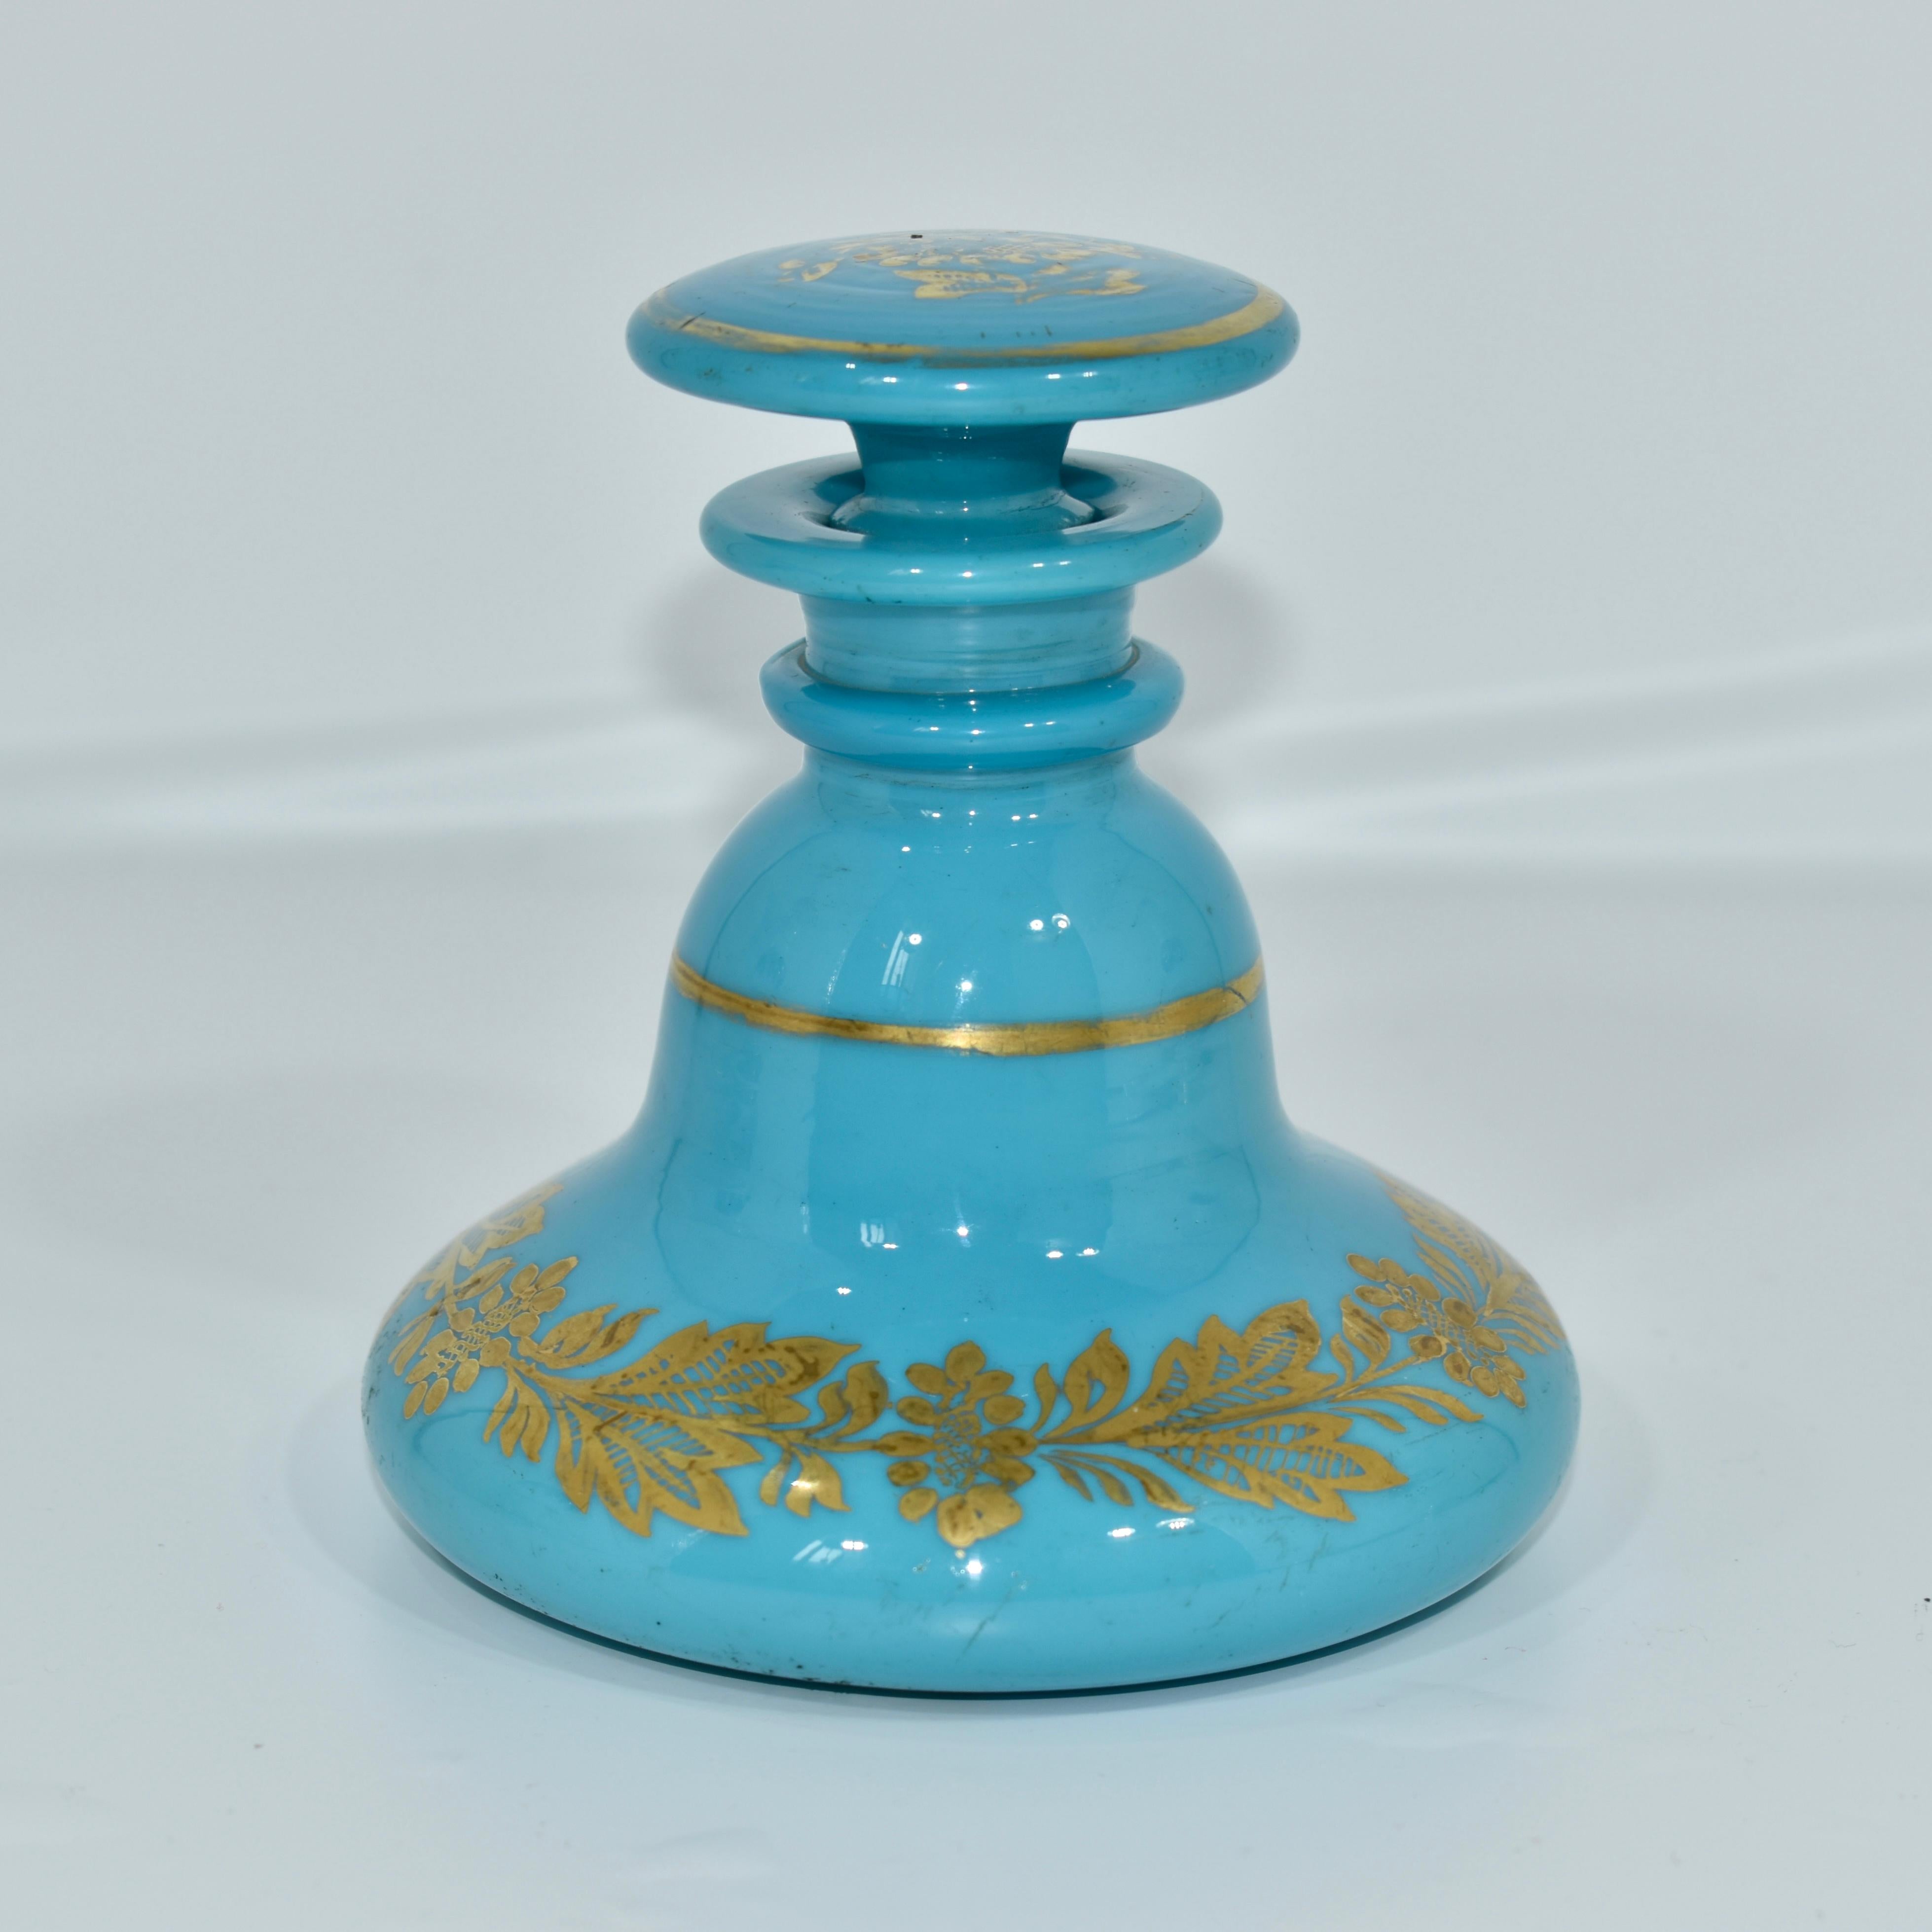 High quality perfume bottle and stopper in blue opaline glass with gold enamel decoration

beautifully shaped circular body features gilding highlights and a continuous line hand-painted gold decoration

France, Charles X

Height 25 cm